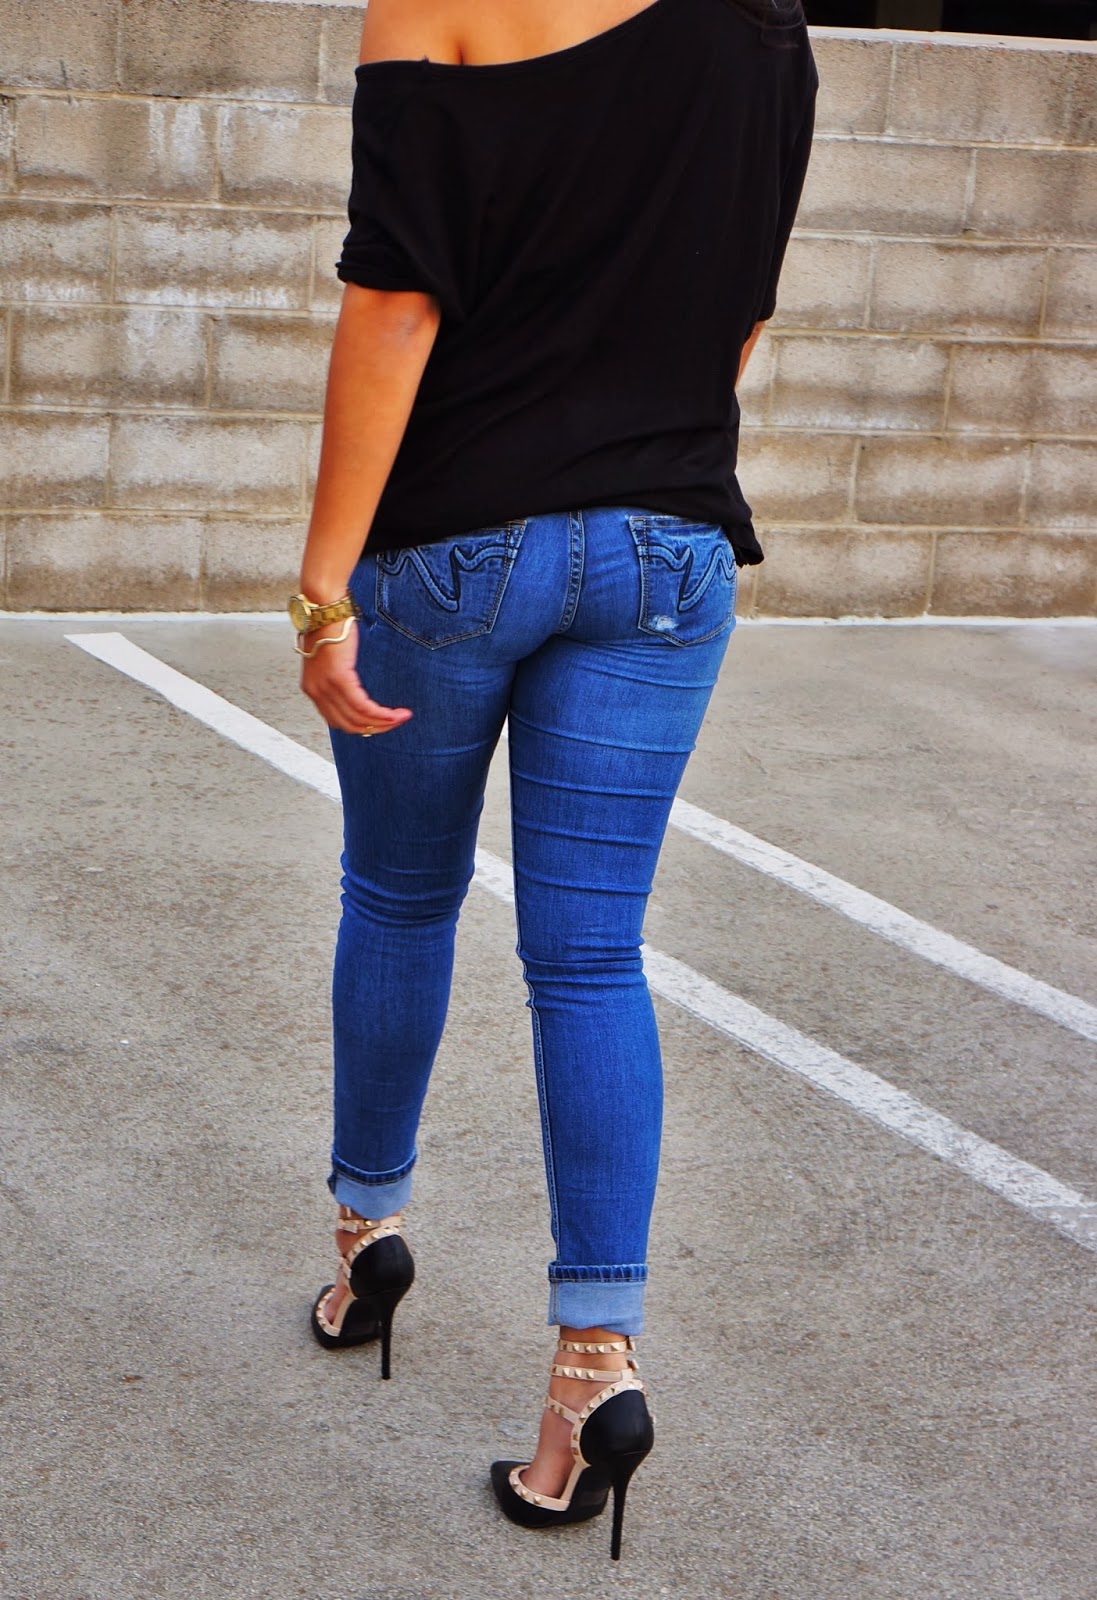 Simplest Way to Dress Up A Pair Jeans | True Honest Fashion